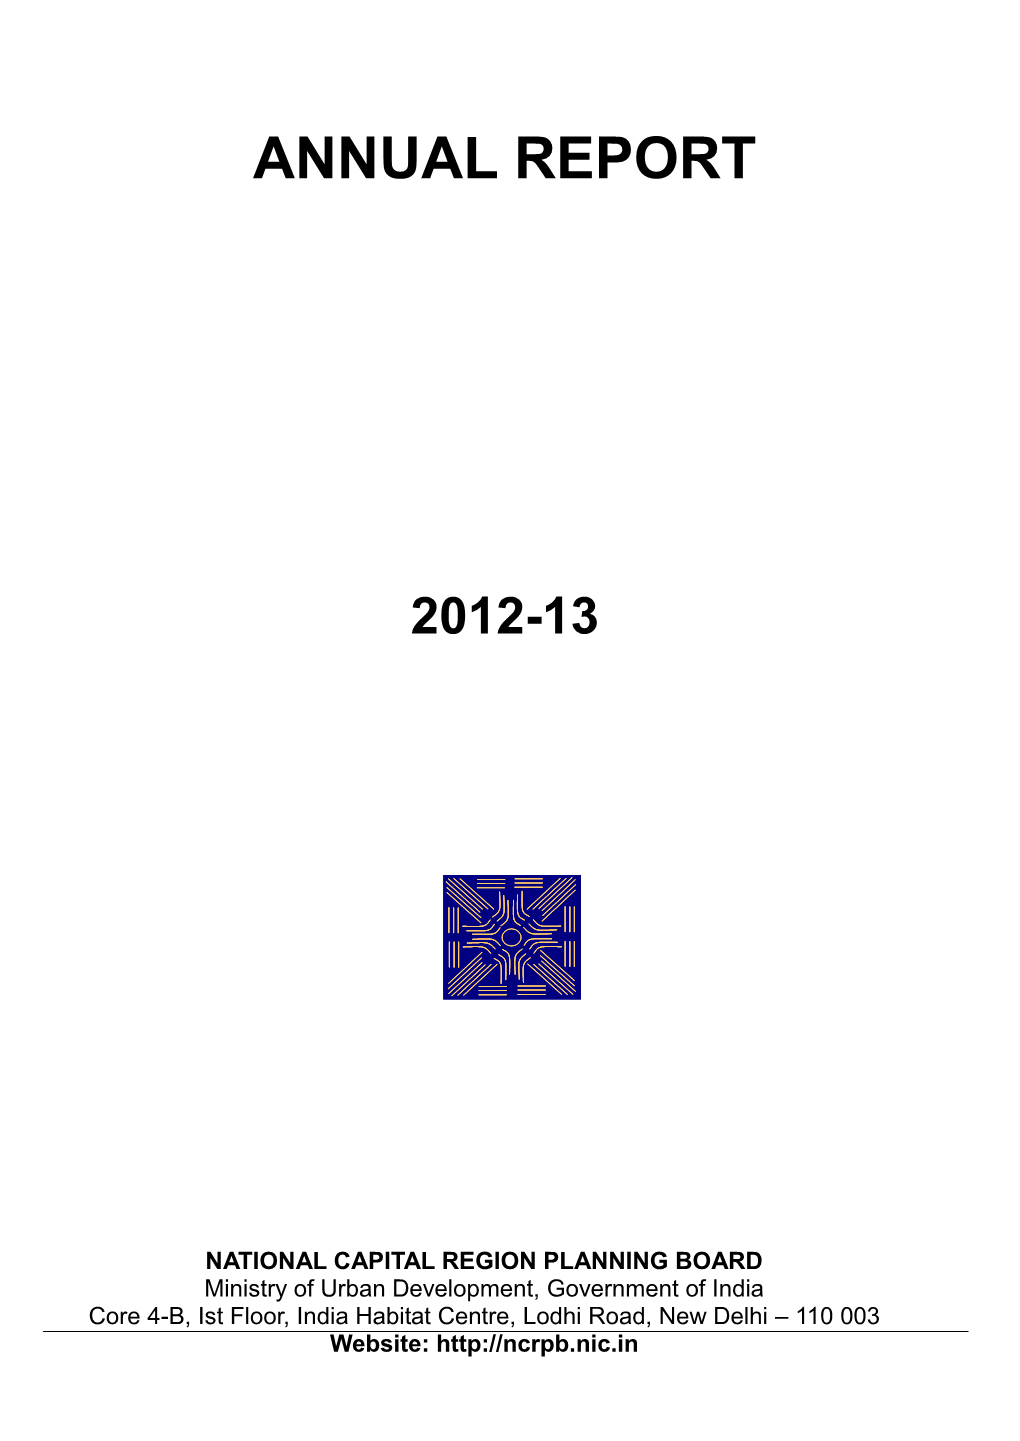 Annual Reports 2012-13